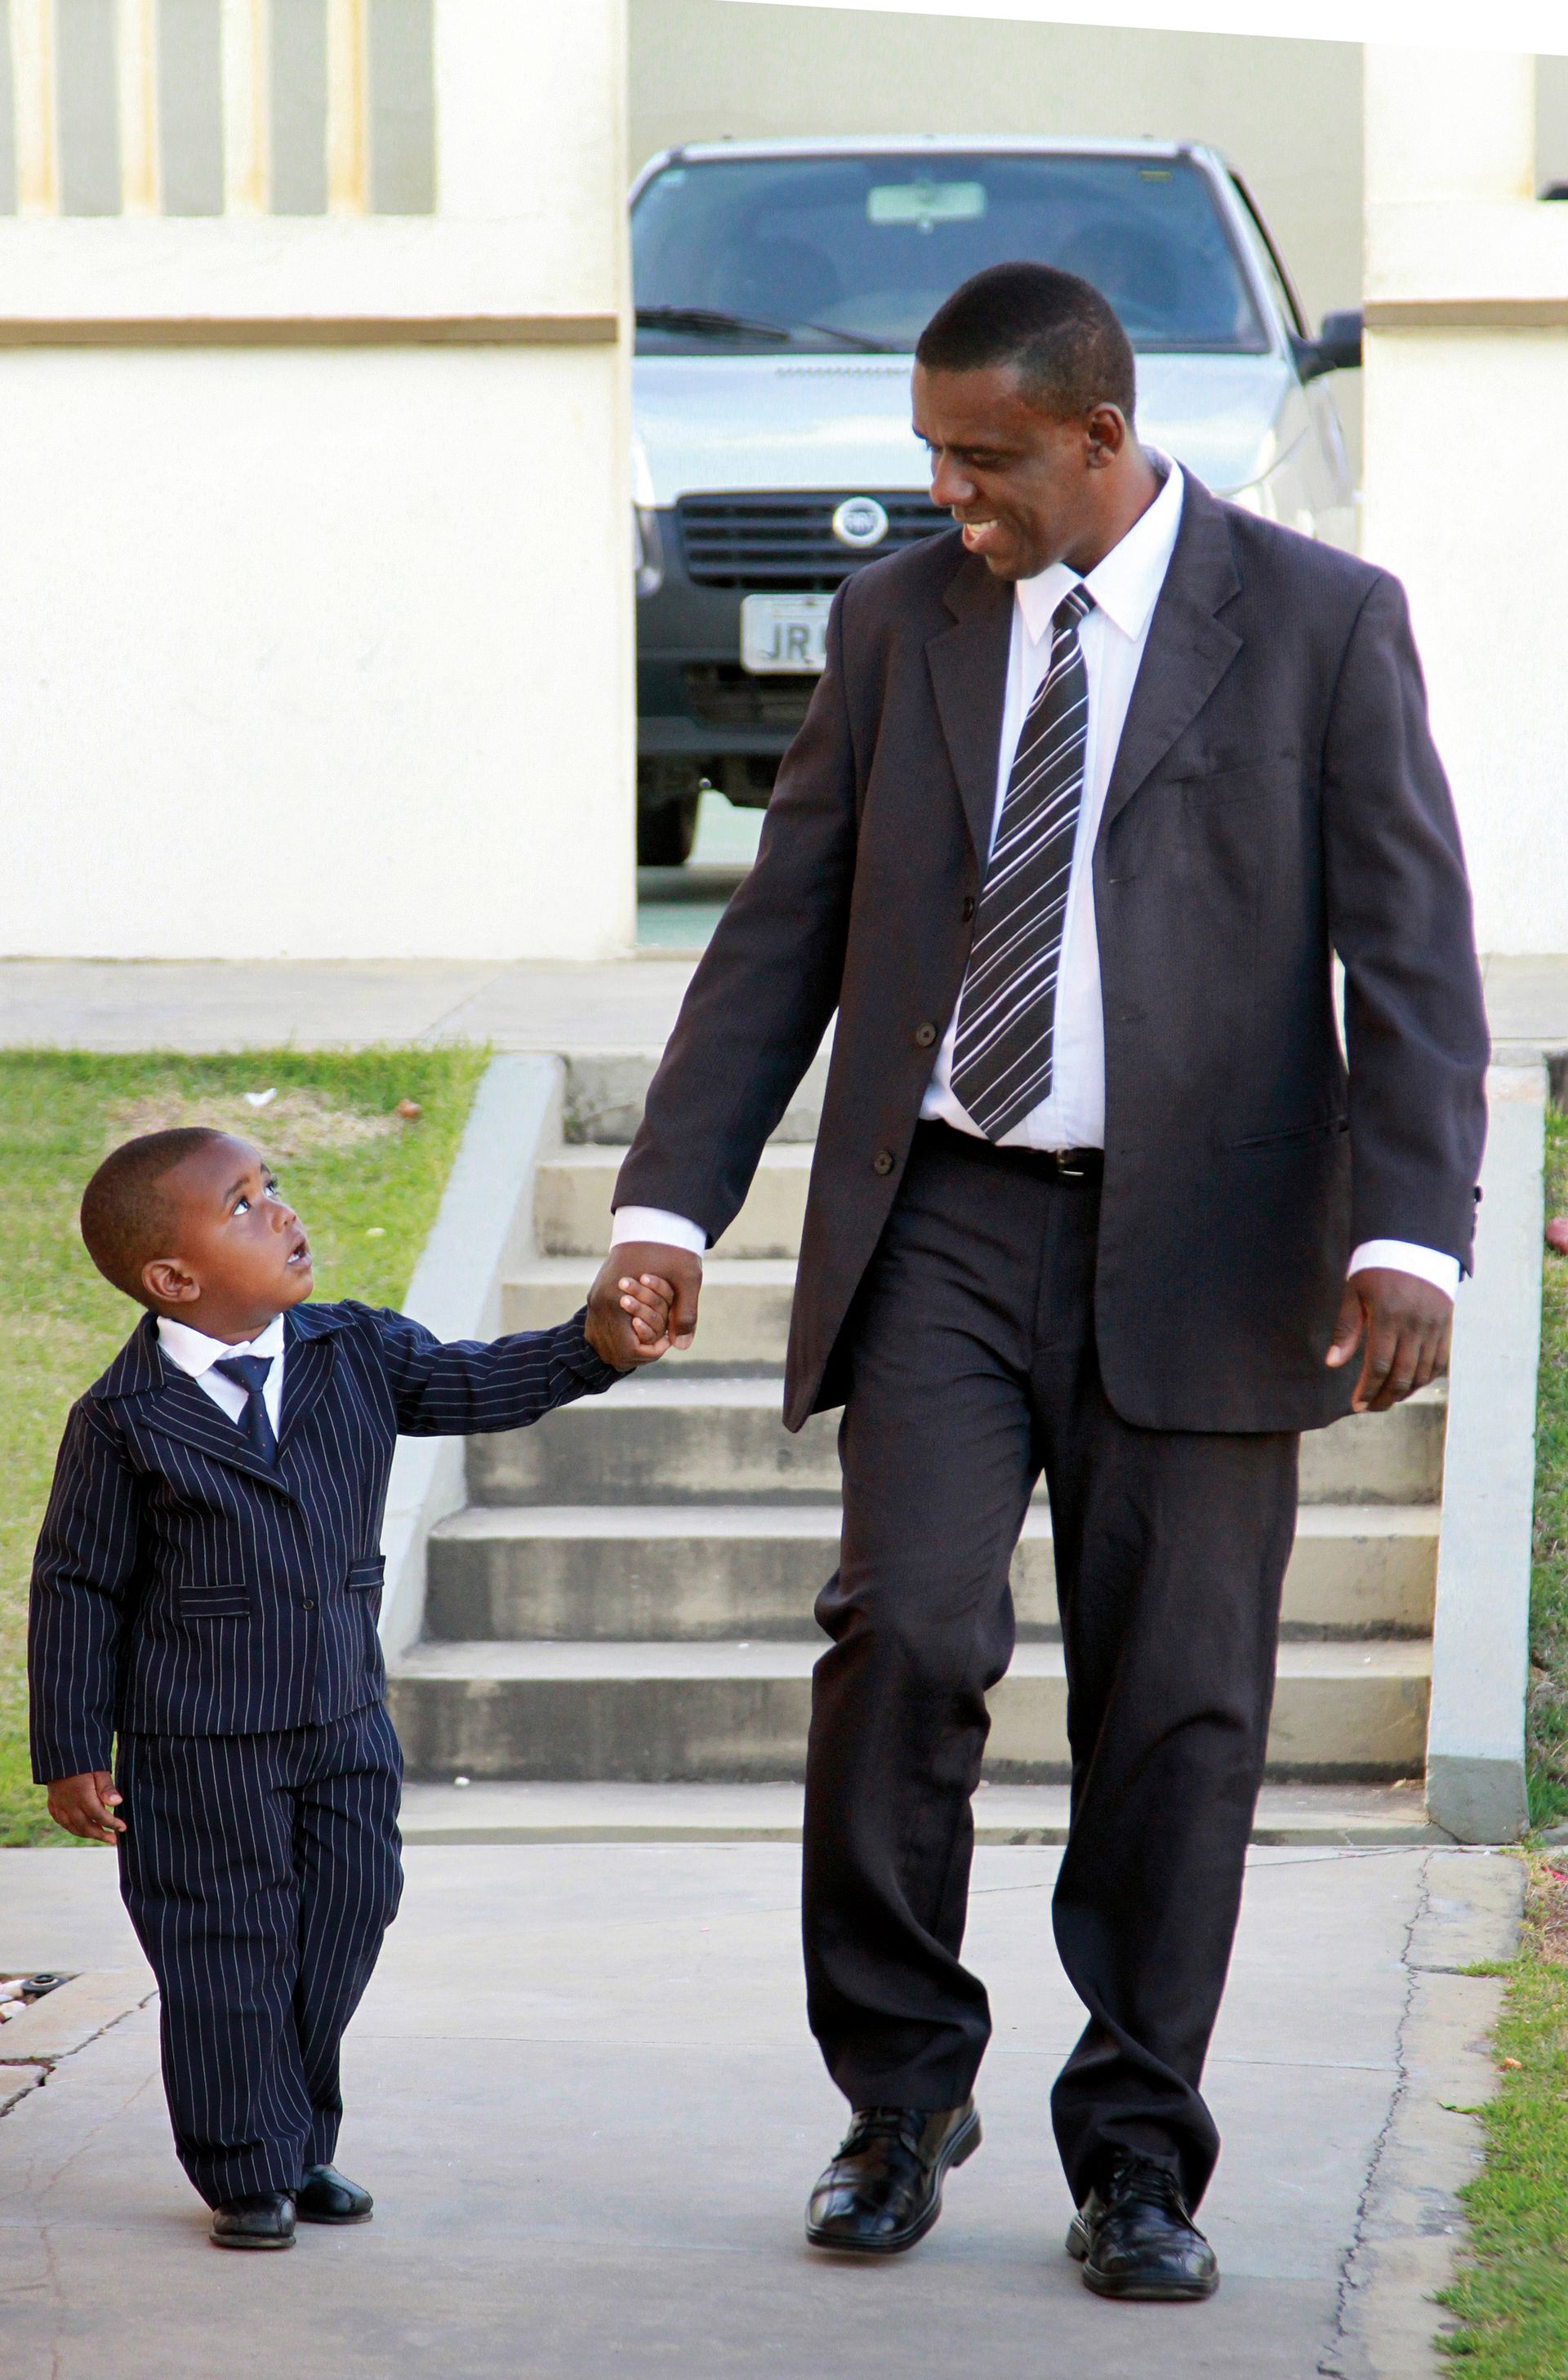 A father walks with his son during general conference.